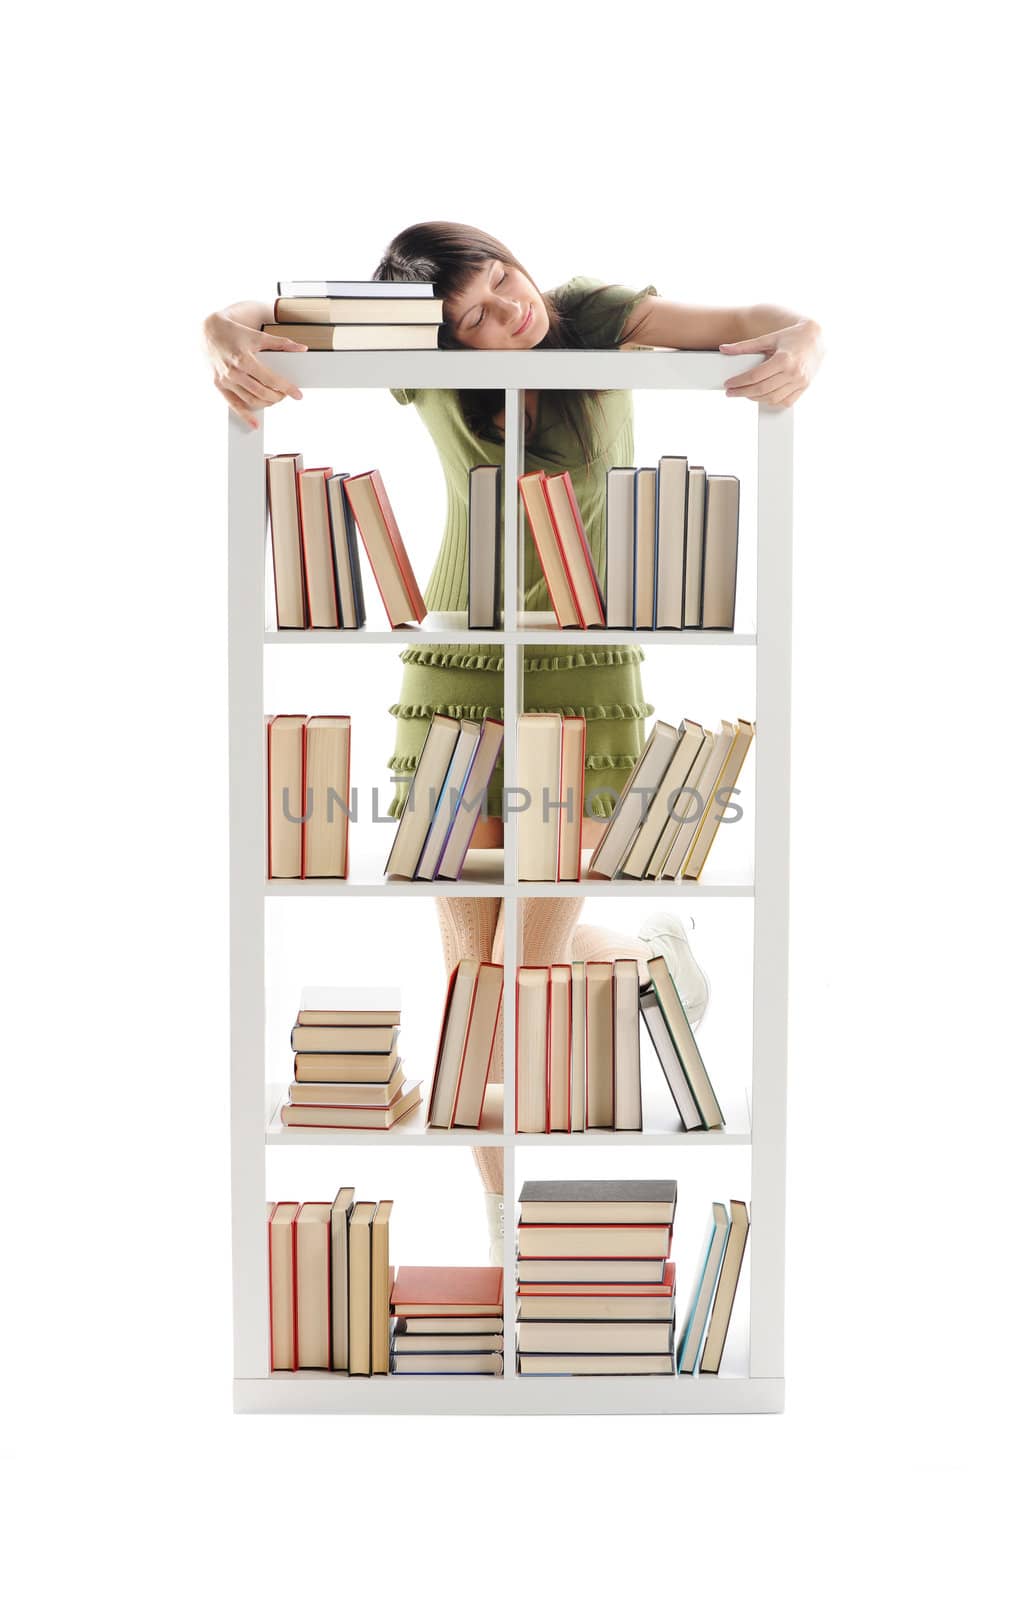 female student with books, white background by stokkete